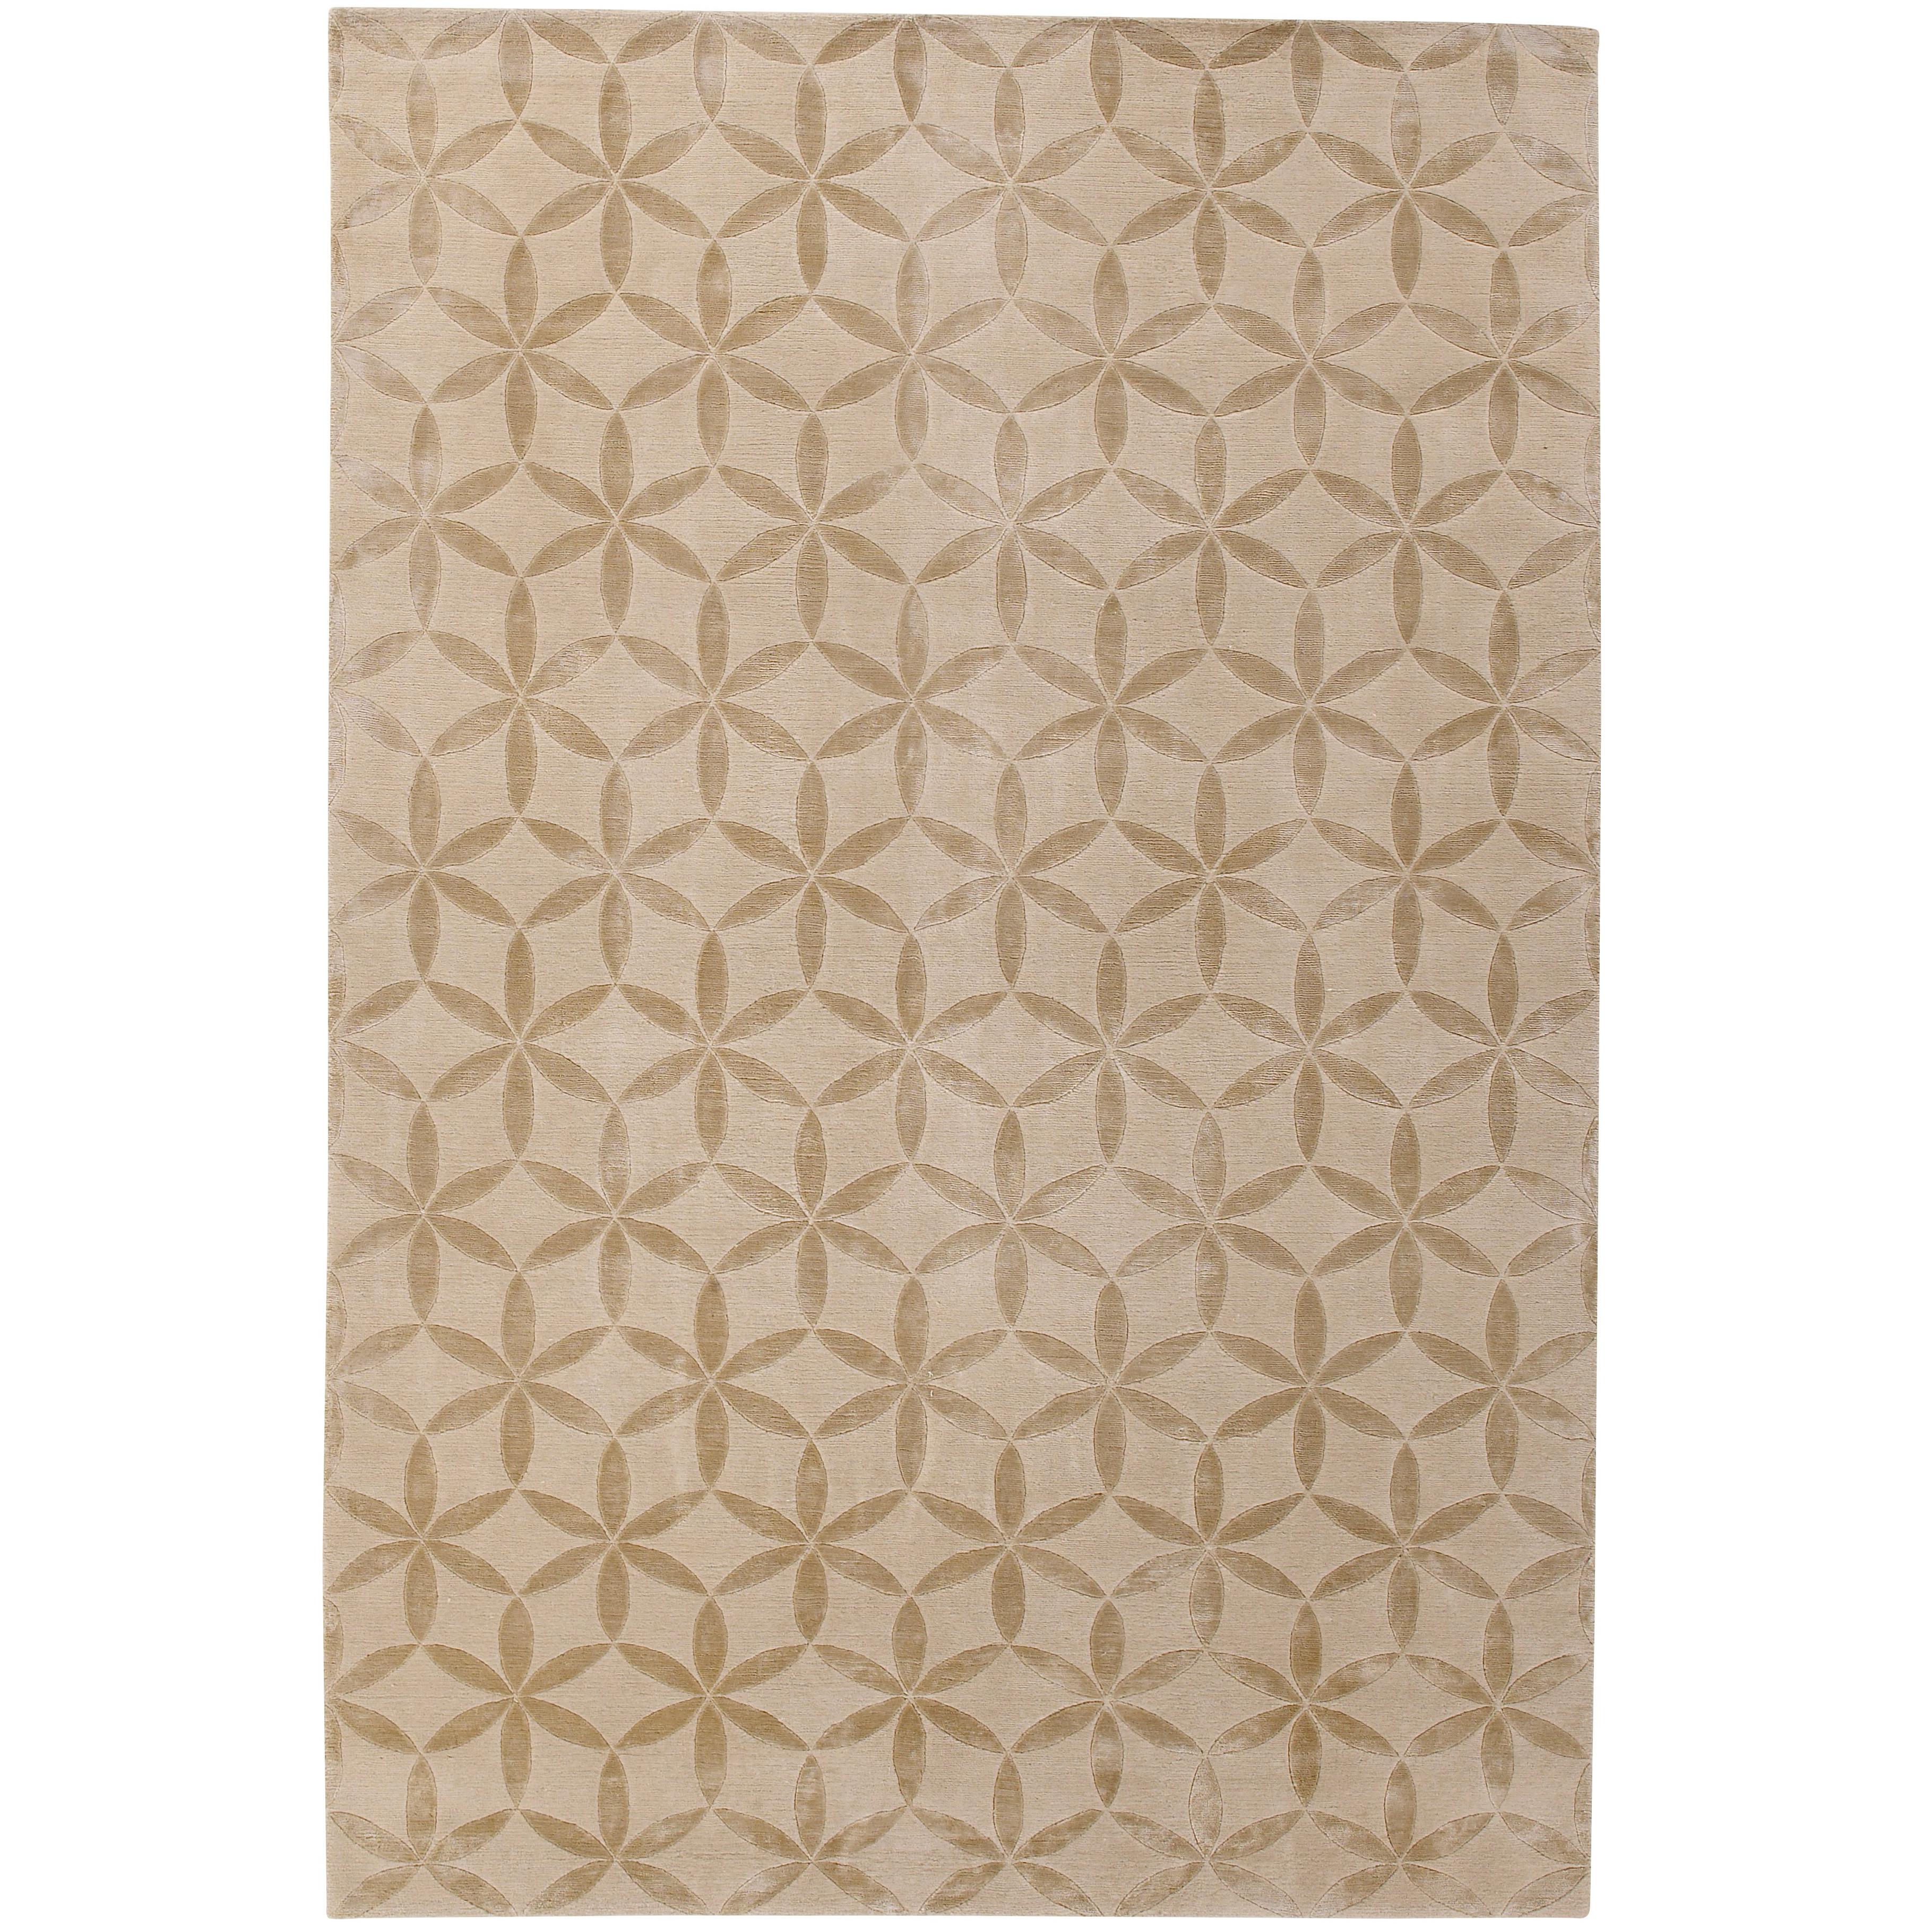 Starflower Hand-Knotted 10x8 Rug in Wool and Silk by Edward Barber & Jay Osgerby